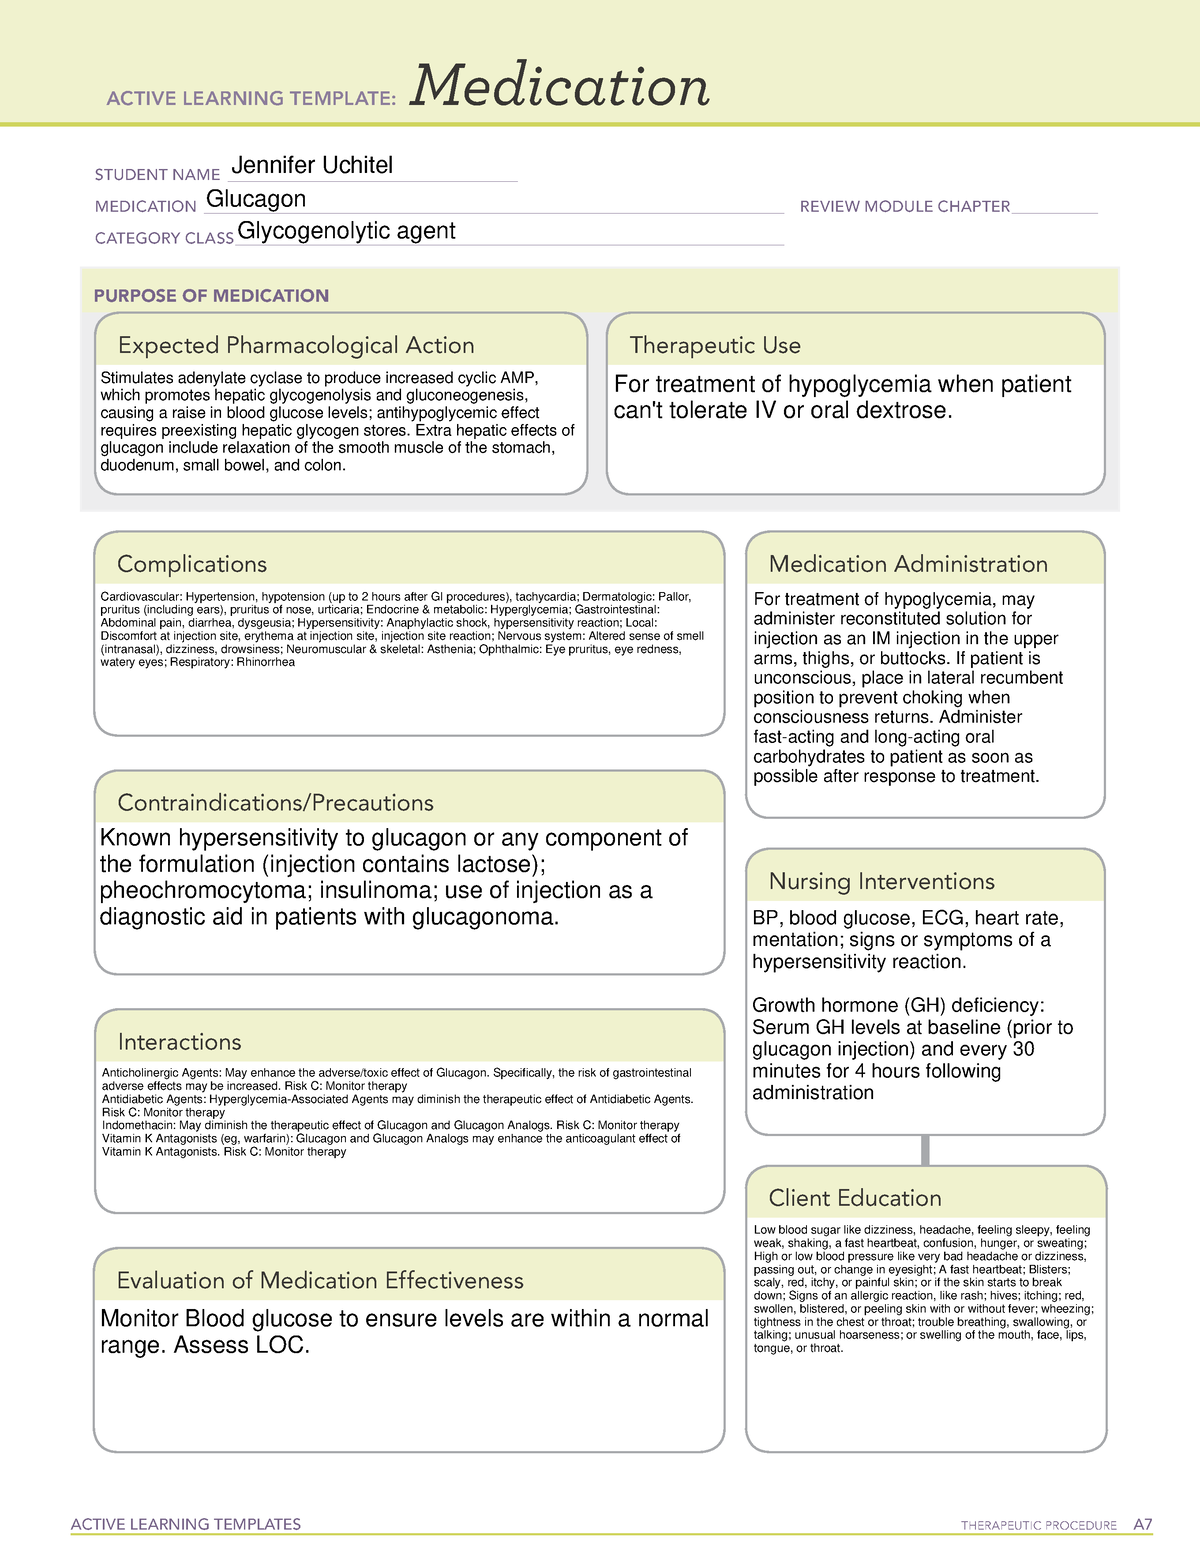 Glucagon med sheet ACTIVE LEARNING TEMPLATES THERAPEUTIC PROCEDURE